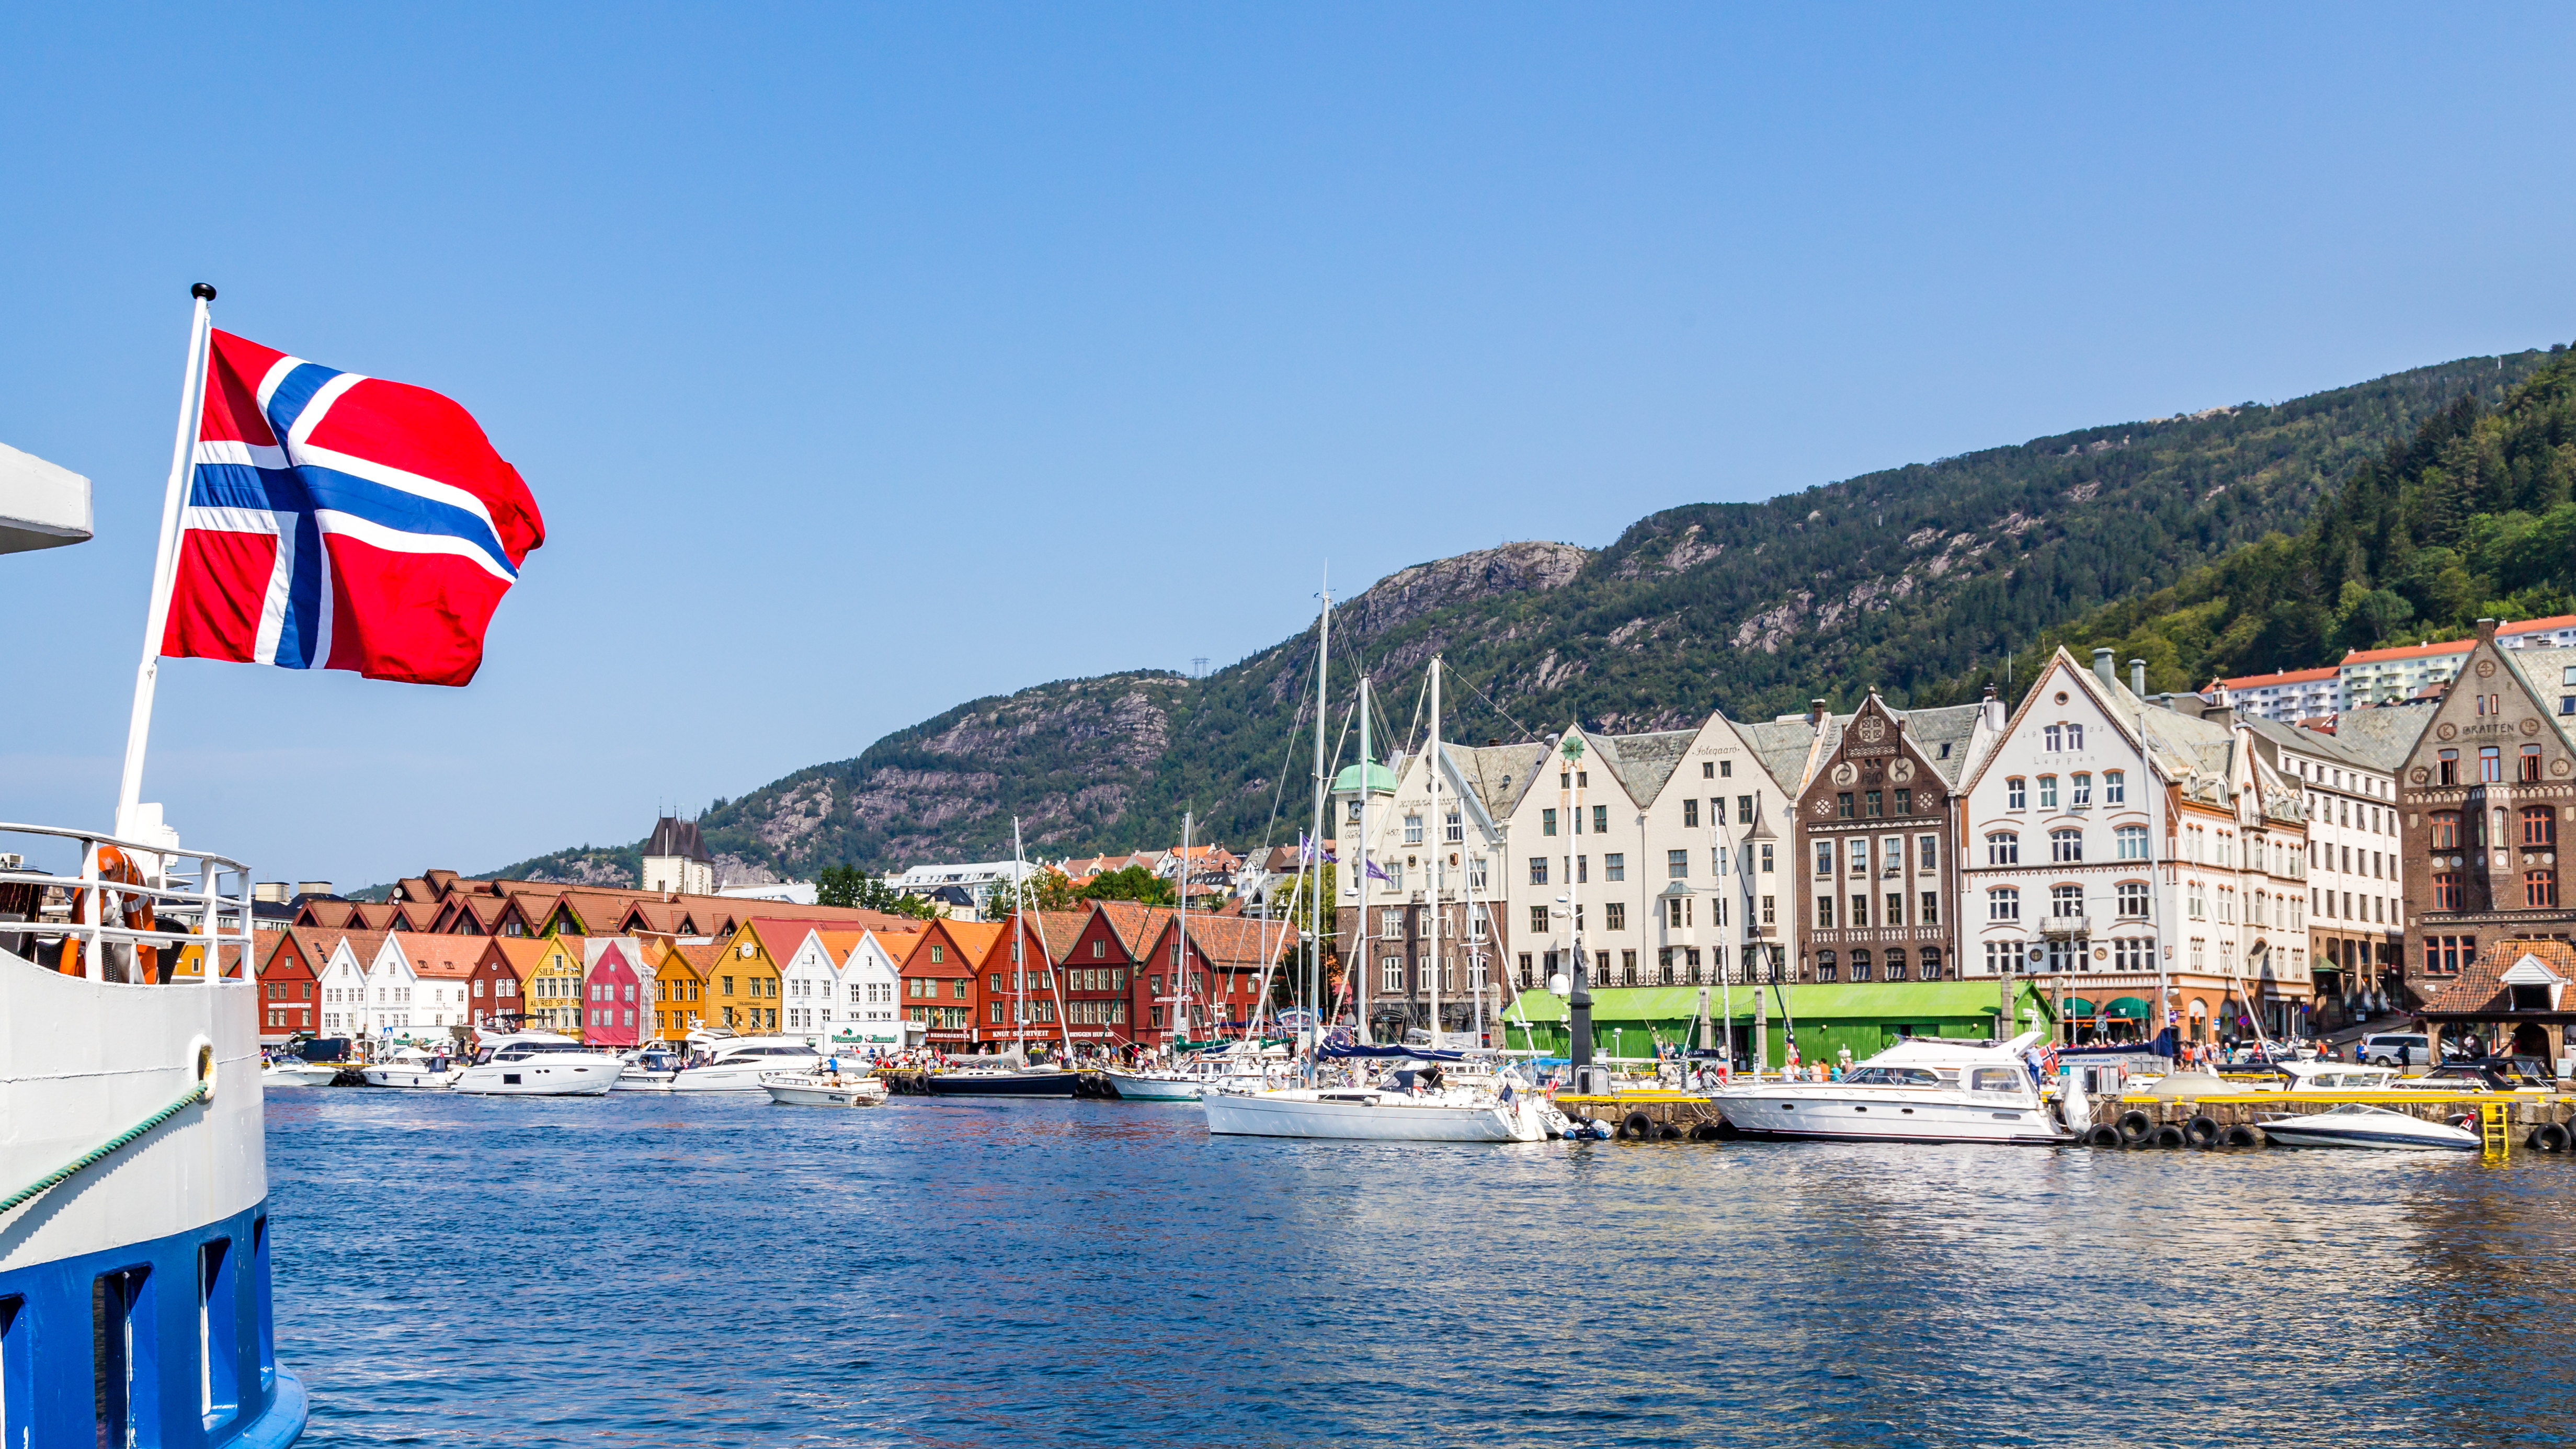 Image of coastal city Bergen, Norway, with the Norwegian flag flying from a boat.